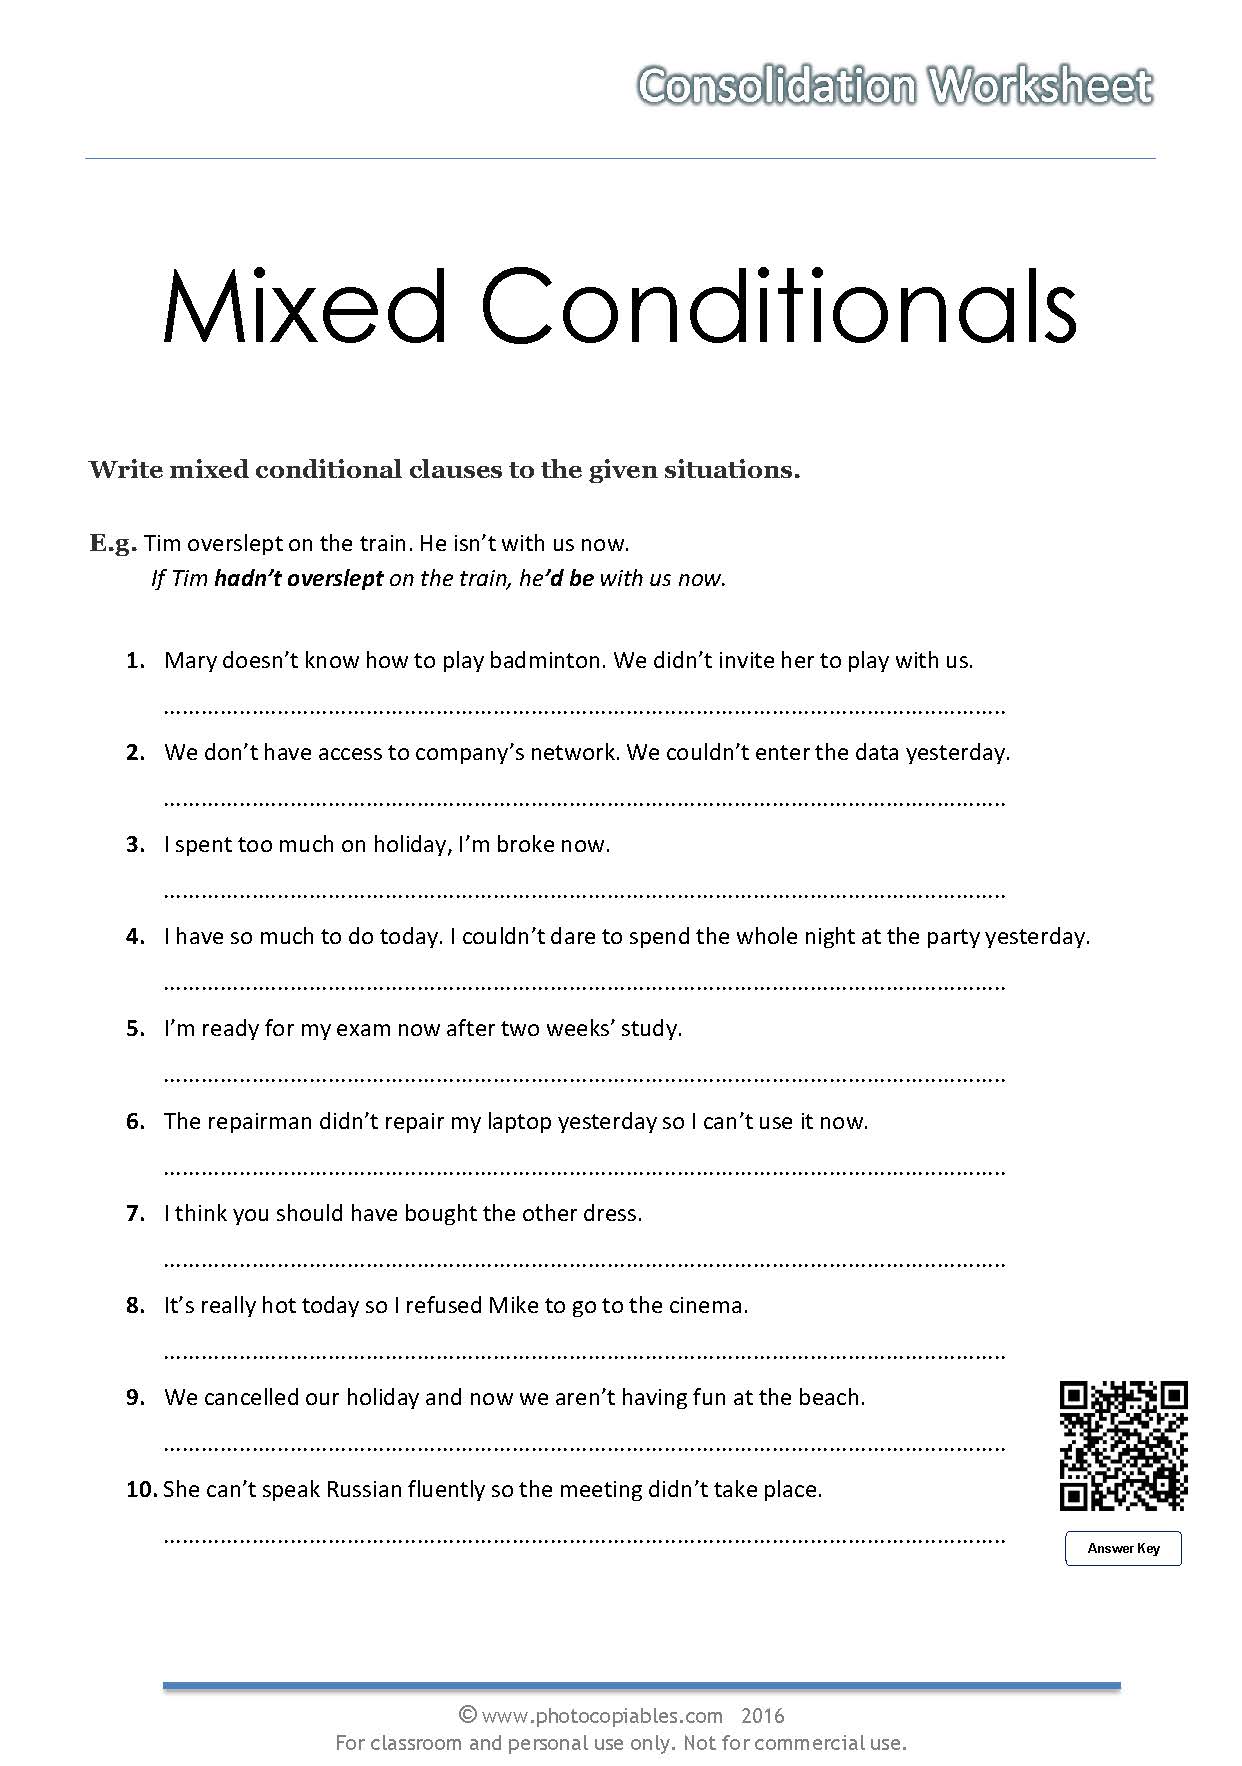 mixed-conditionals-worksheet-photocopiables